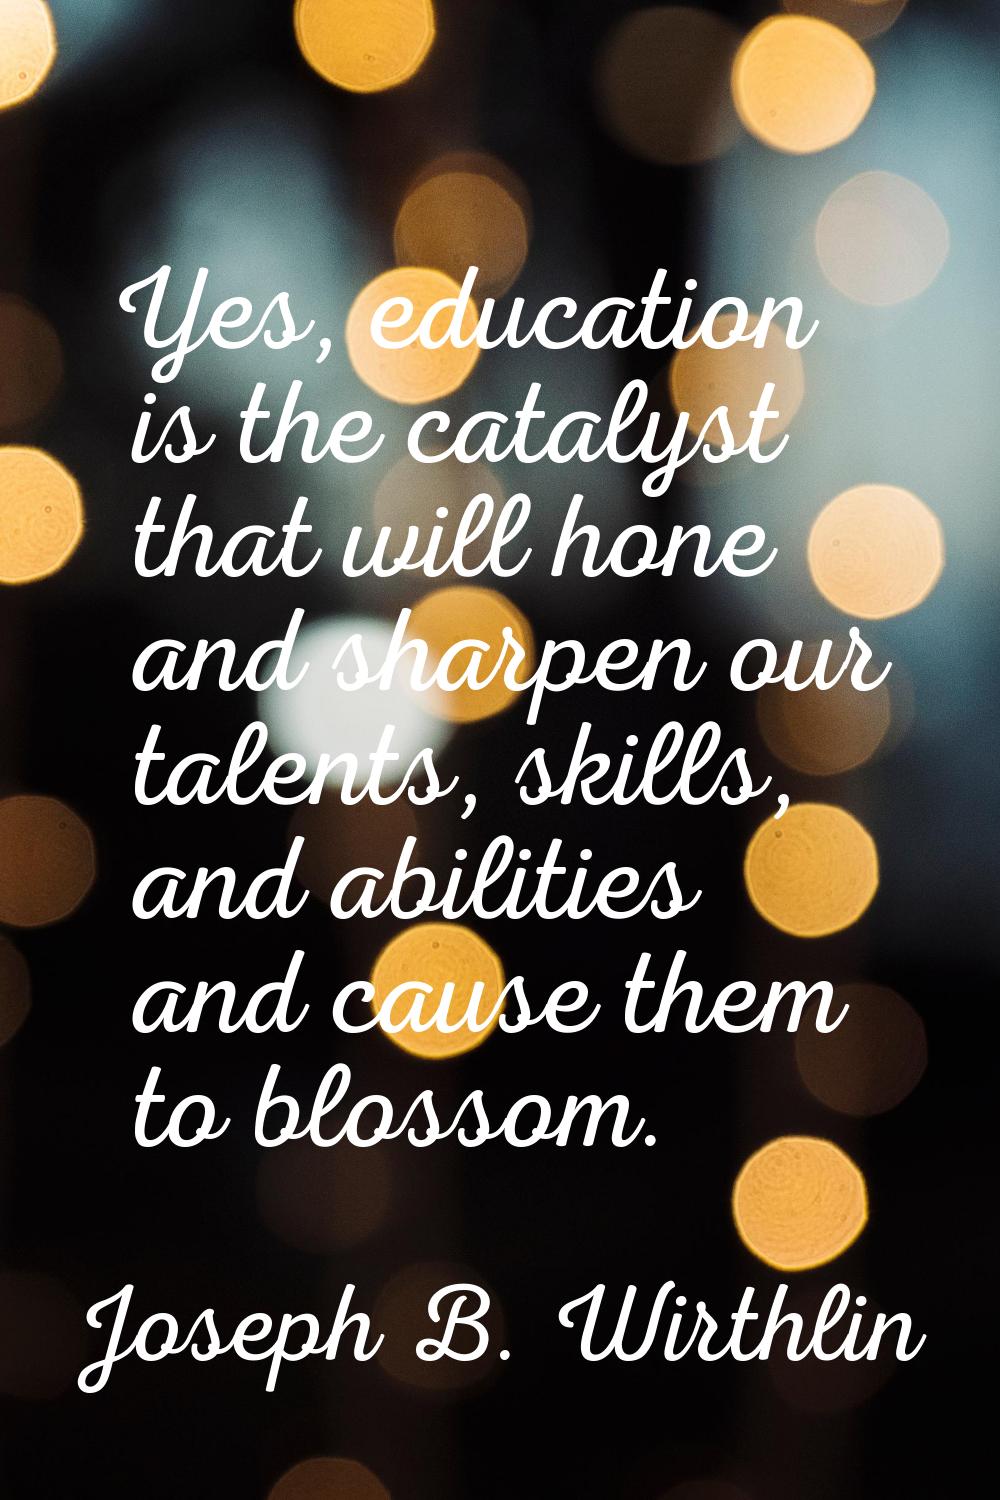 Yes, education is the catalyst that will hone and sharpen our talents, skills, and abilities and ca